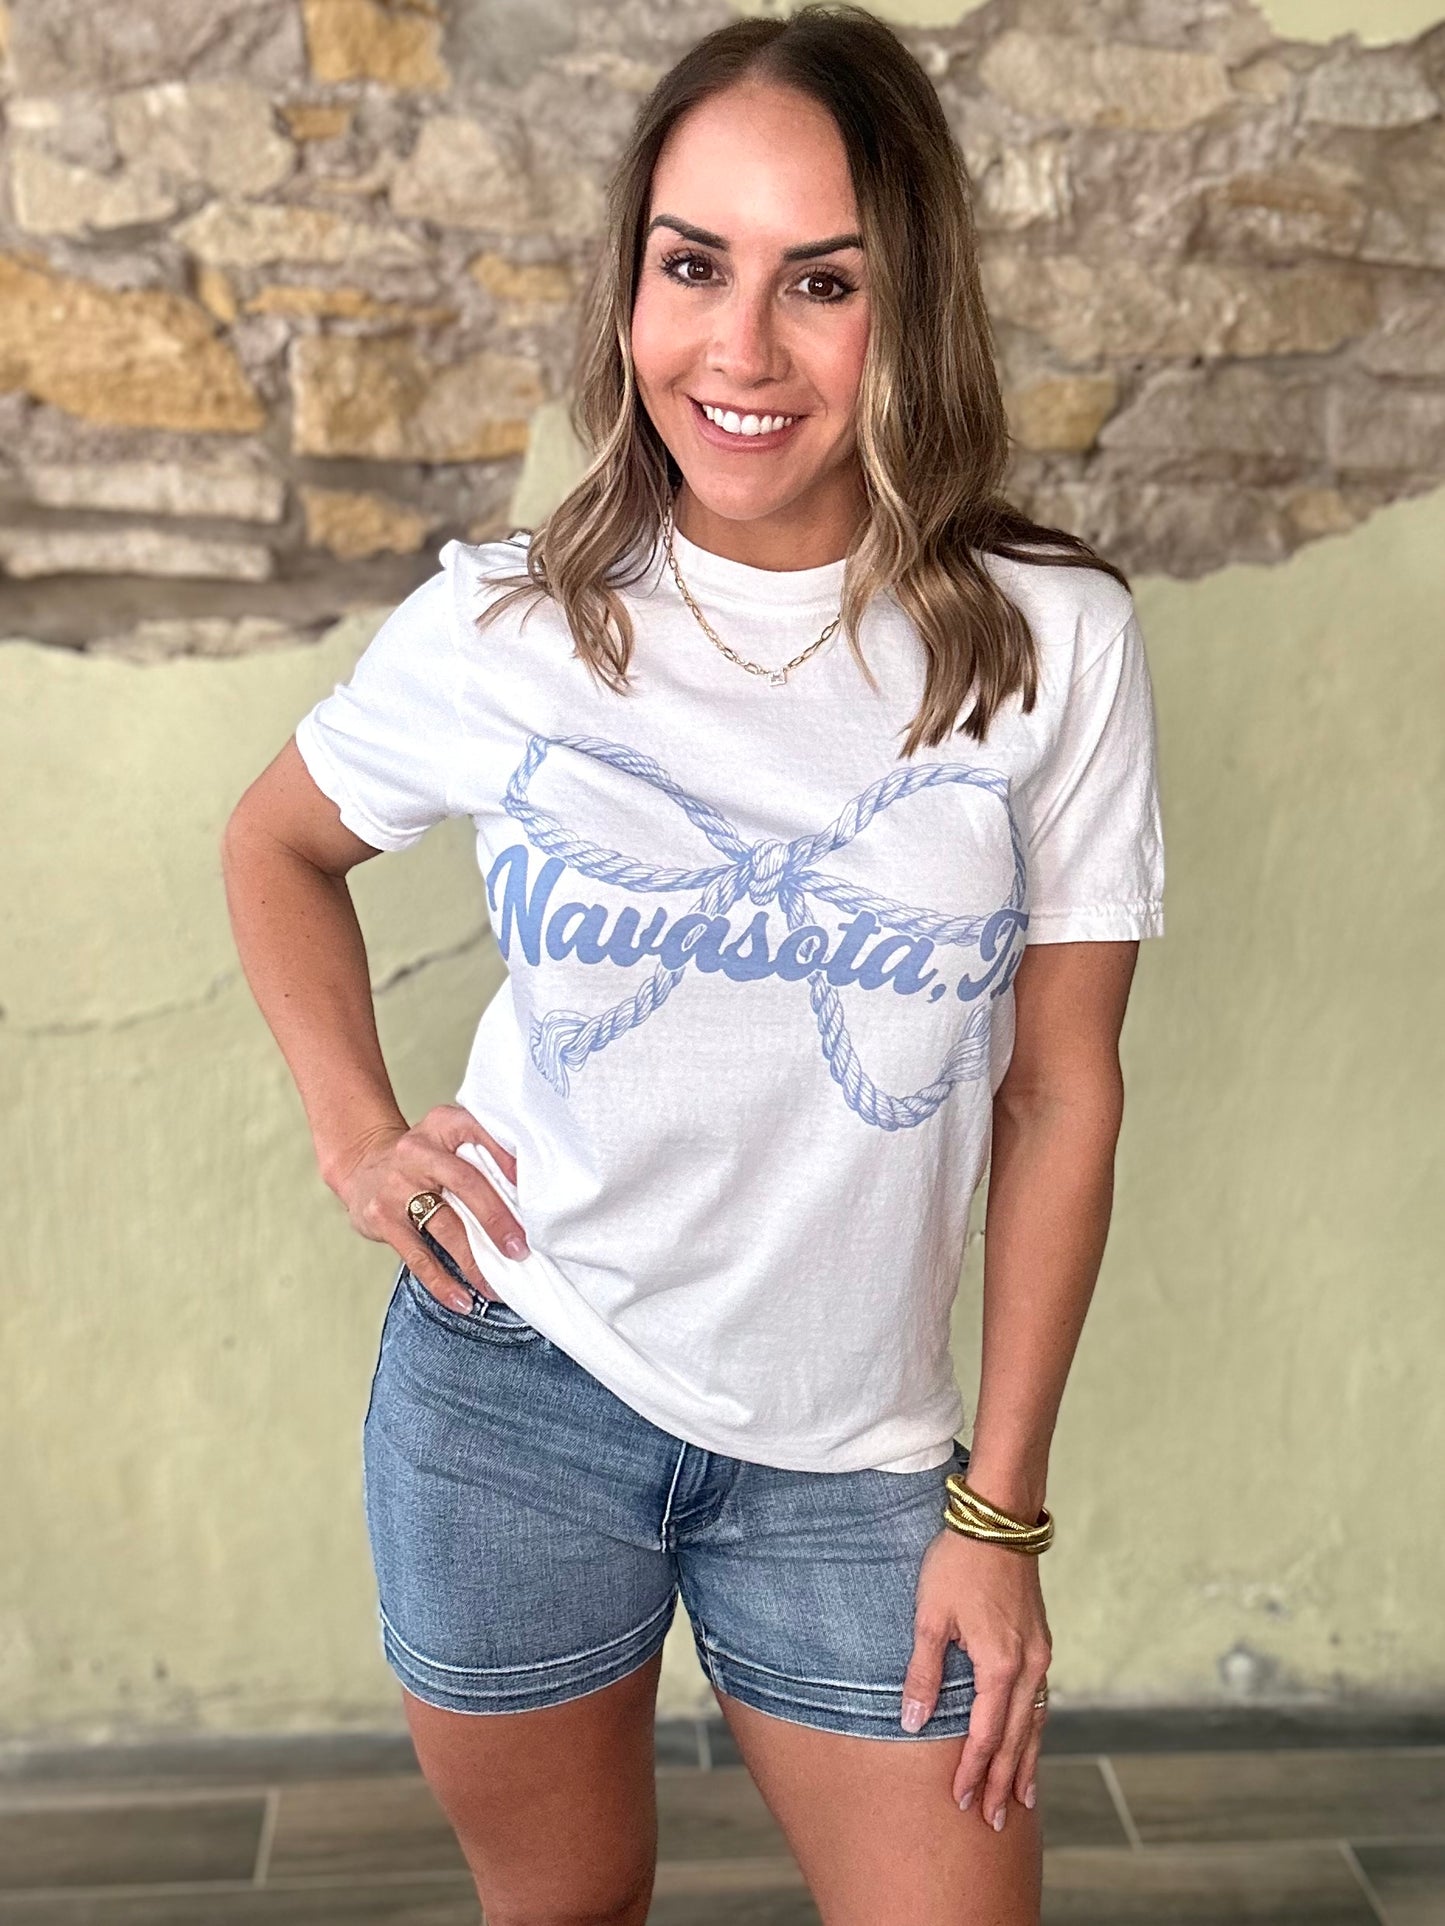 Navasota, Tx Rope Bow Tee in white extended